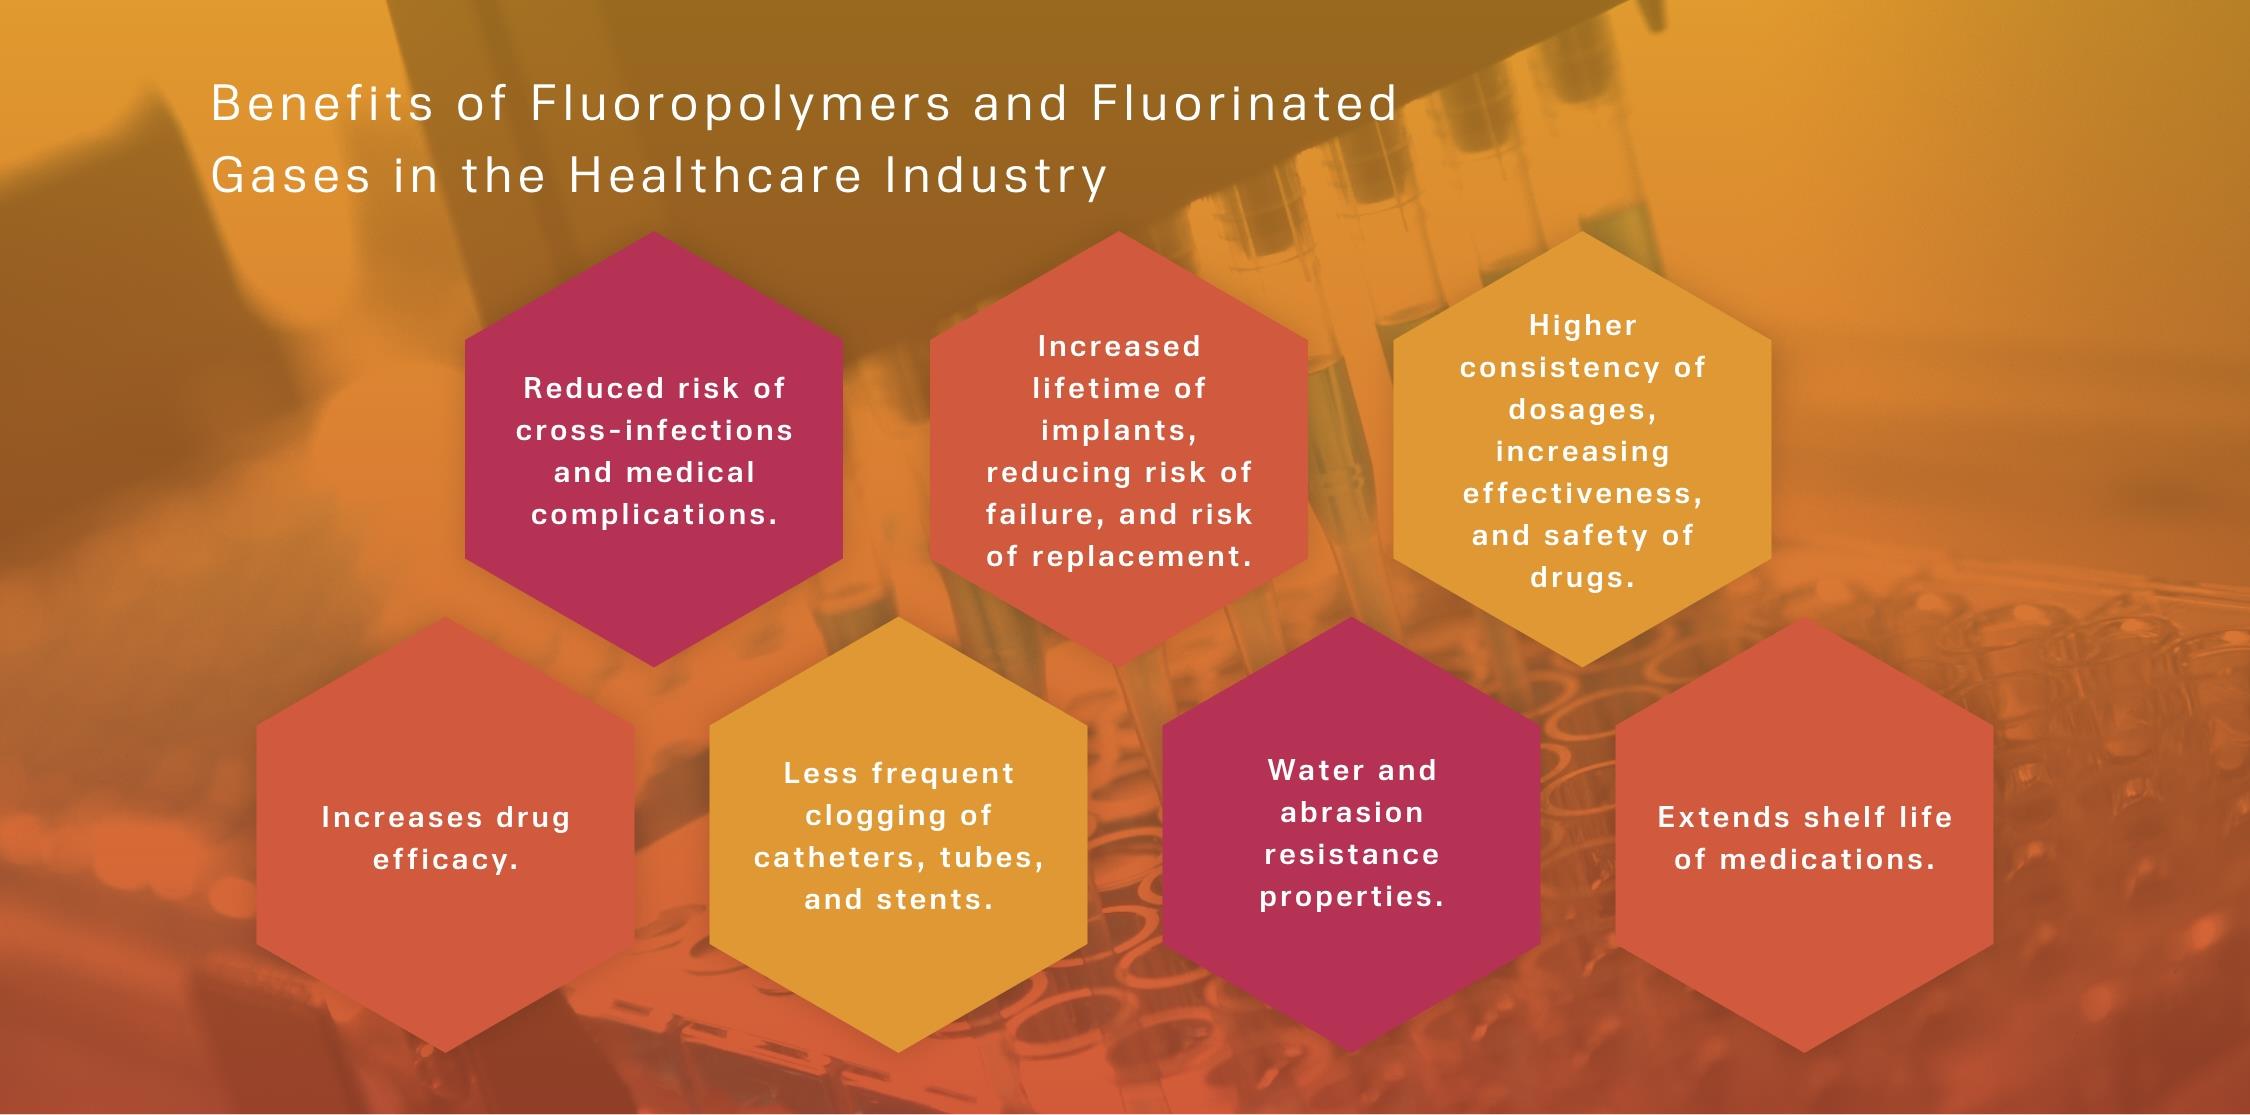 Benefits of Fluoropolymers in the Medical Device Industry